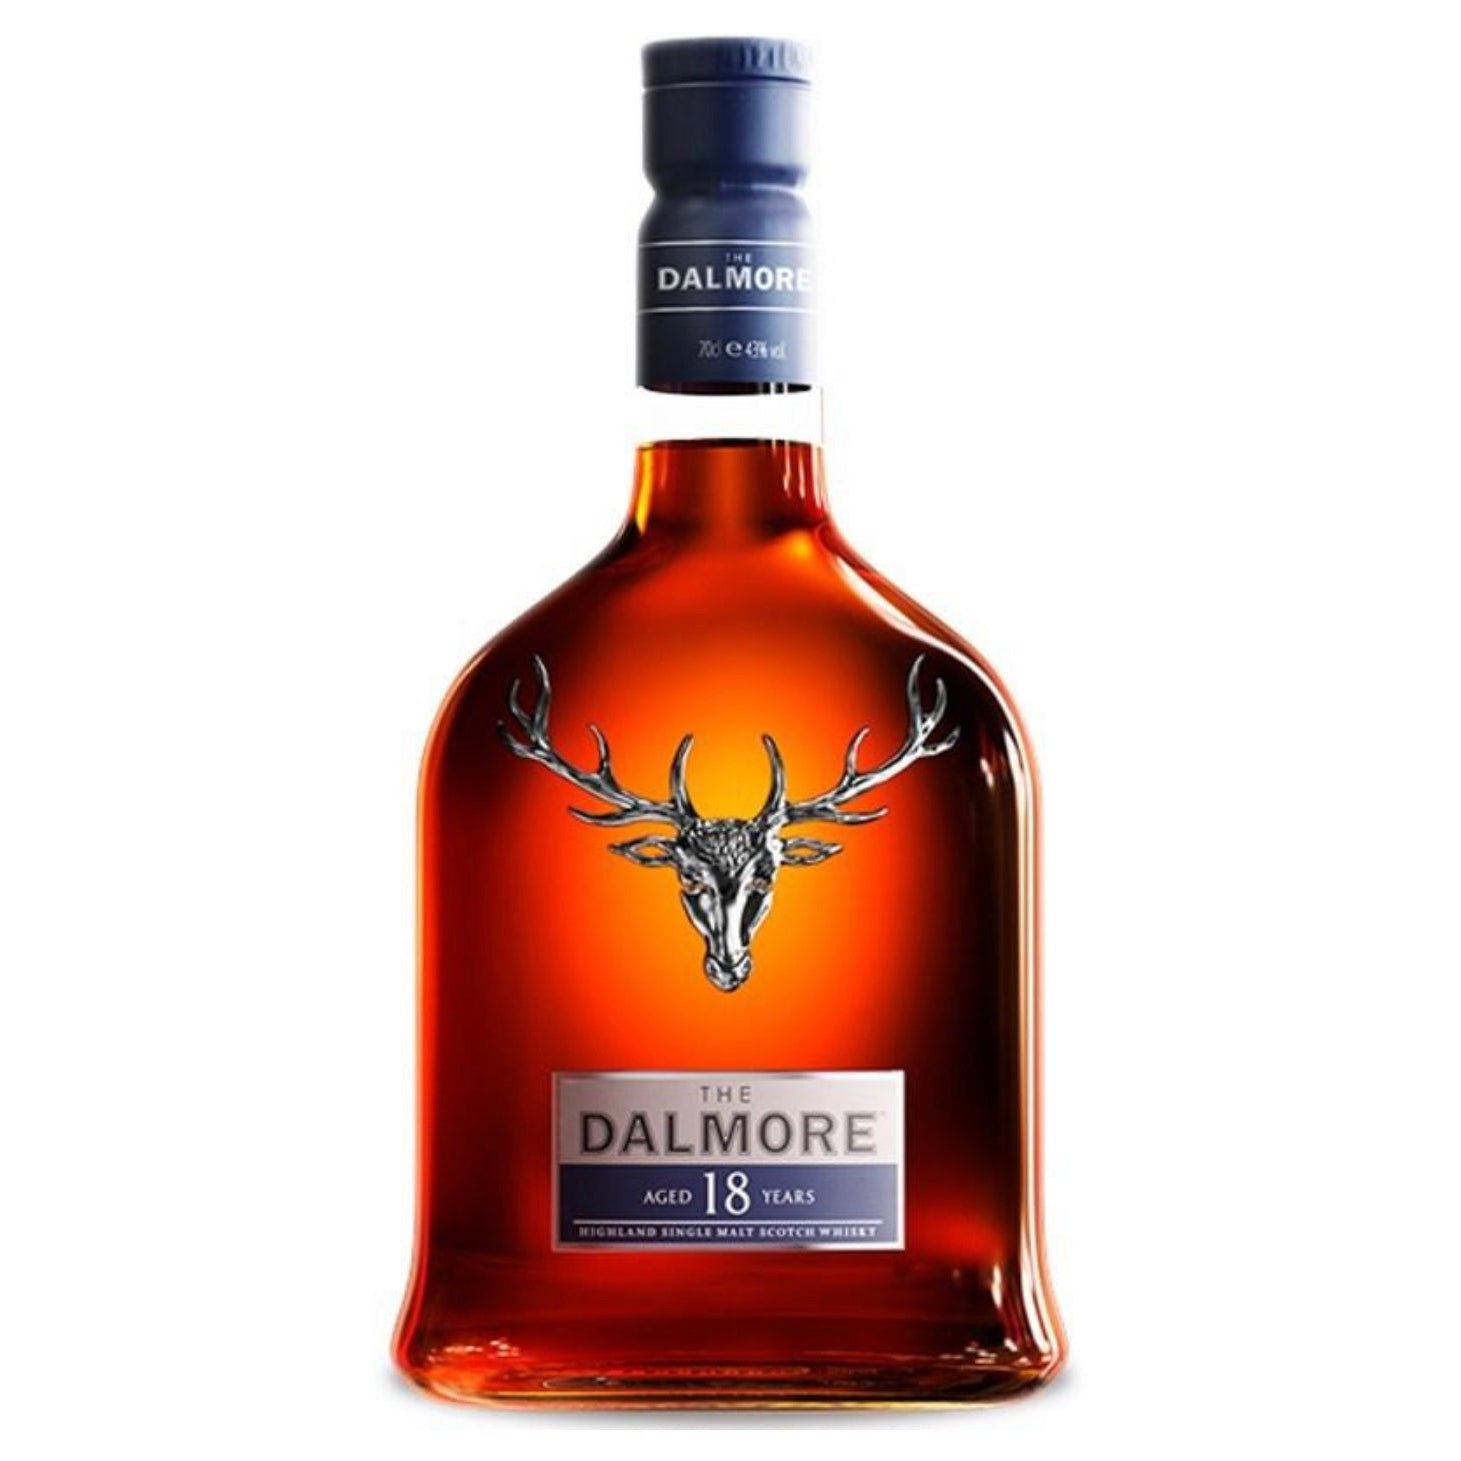 The Dalmore 18 Year Old Scotch Whisky 750ml